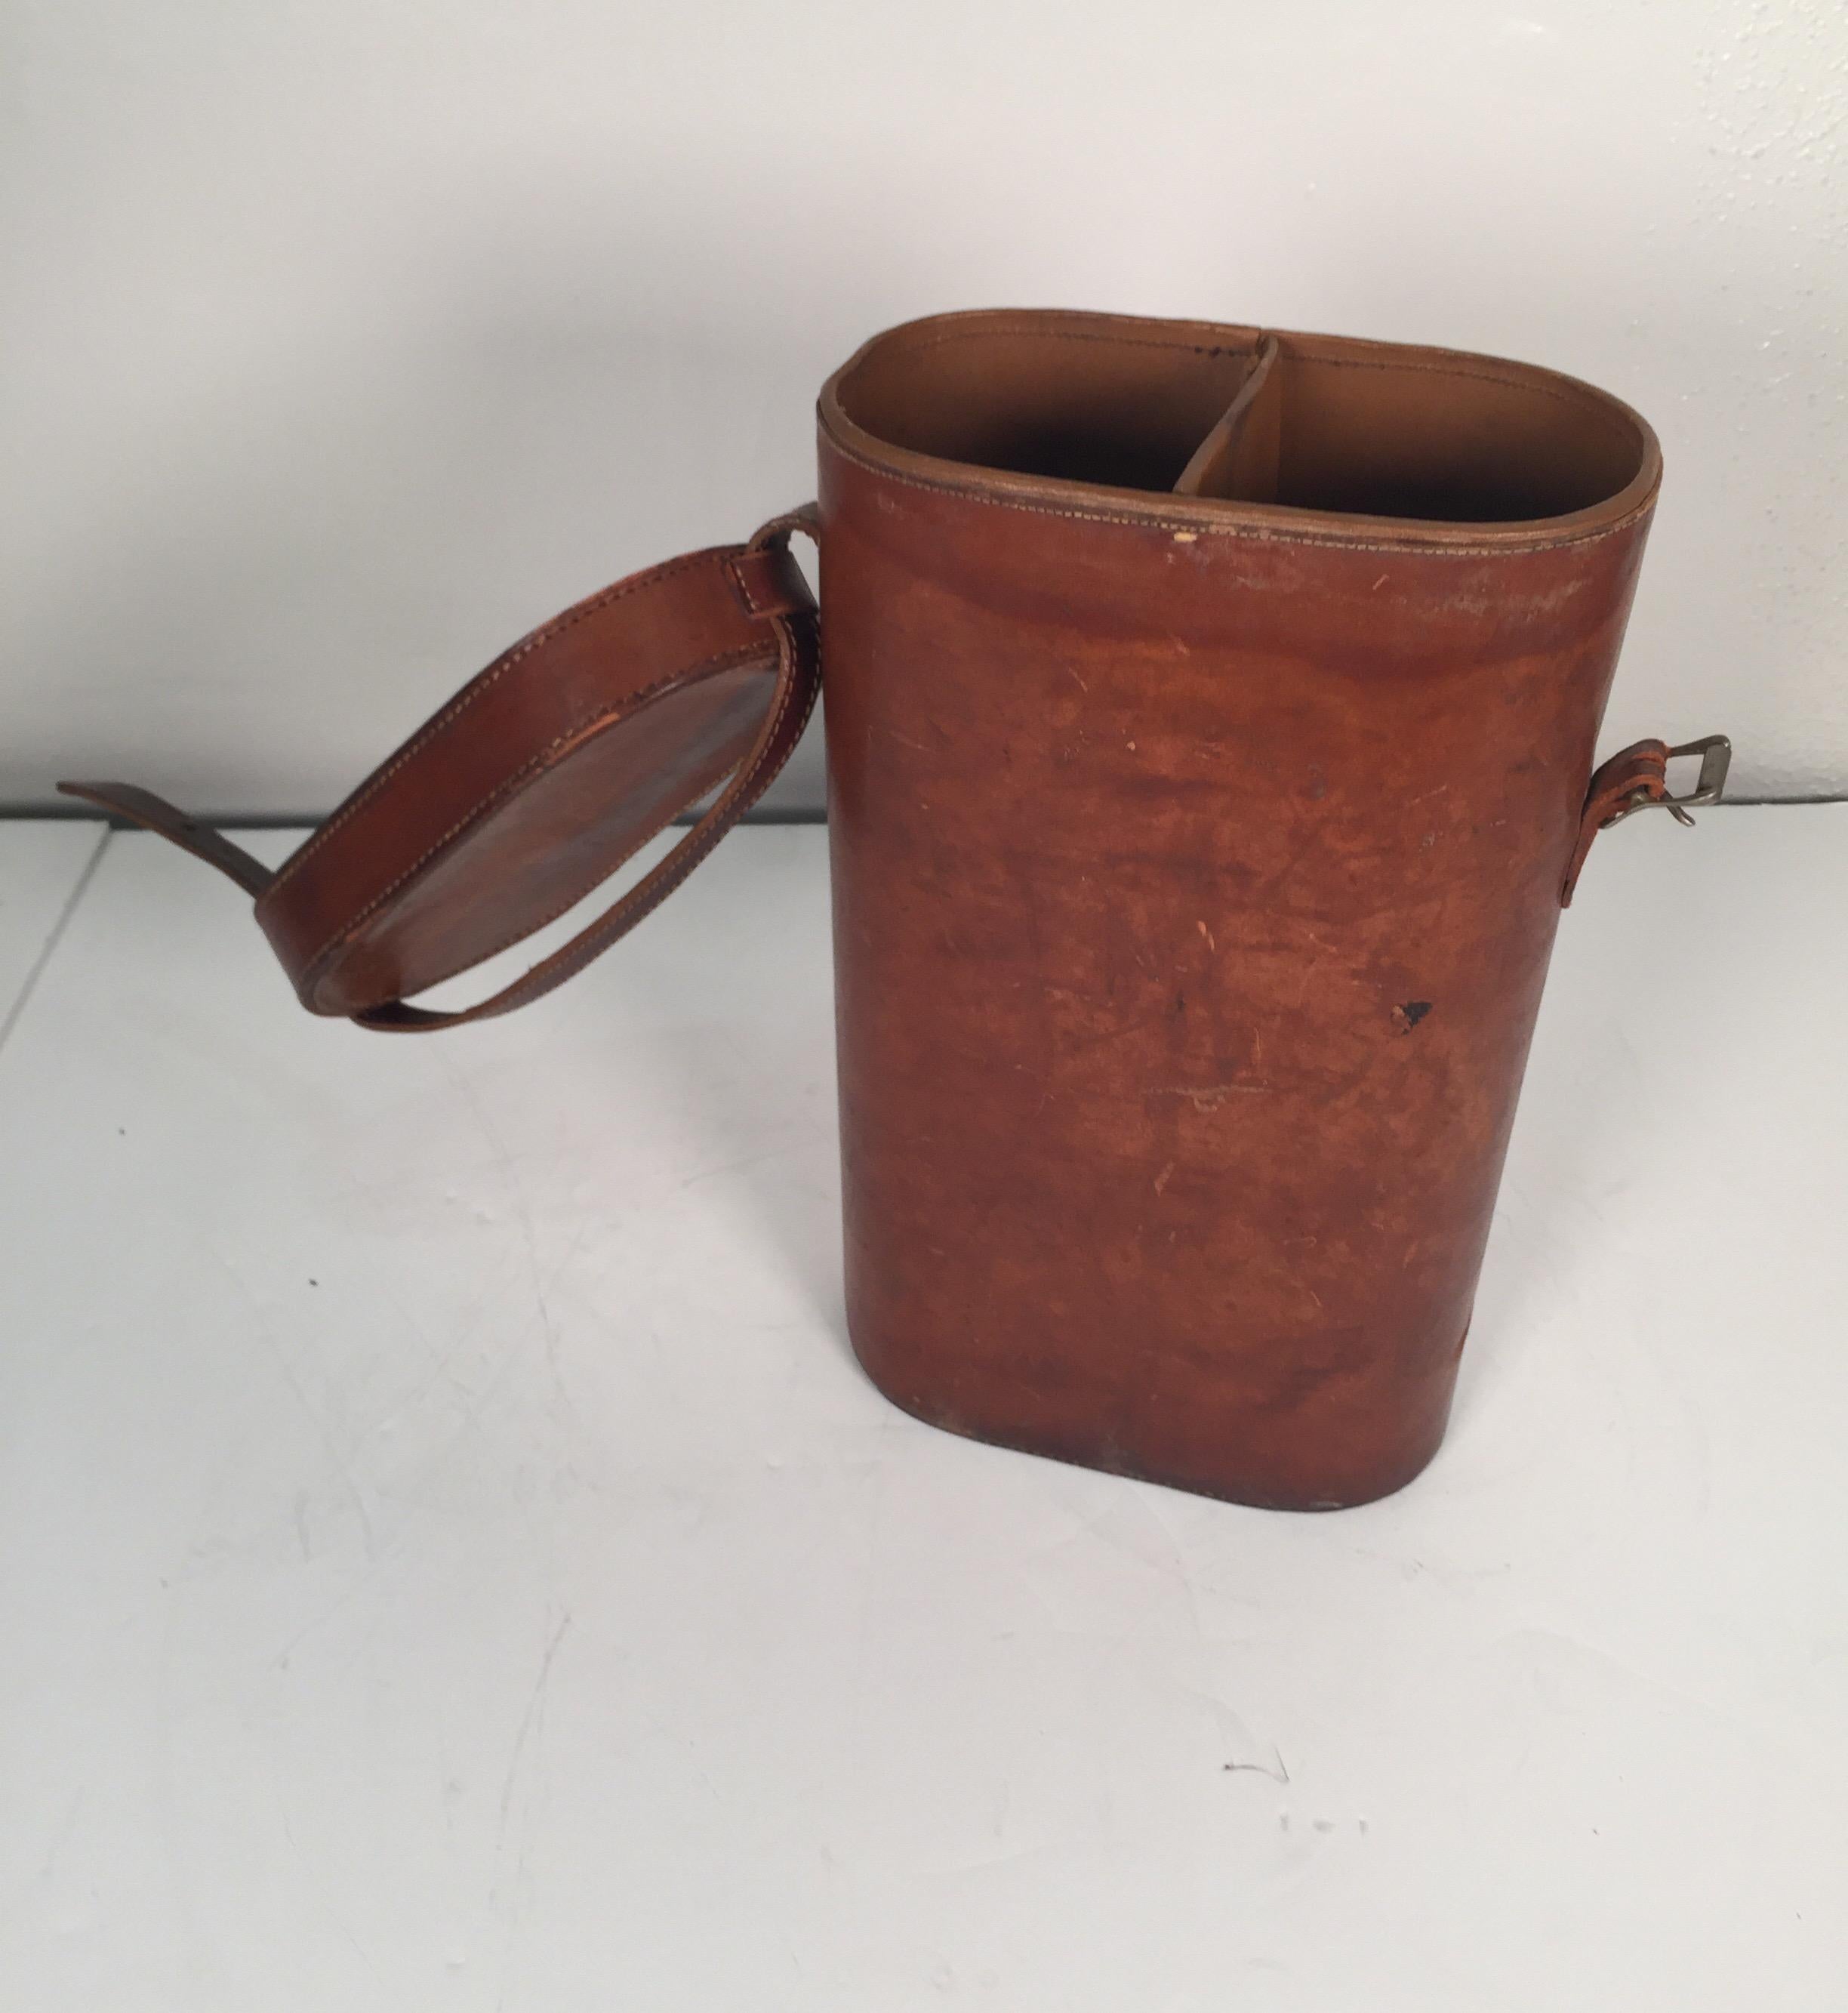 American Vintage Leather Two Bottle Wine Carrier, circa 1940s-1950s